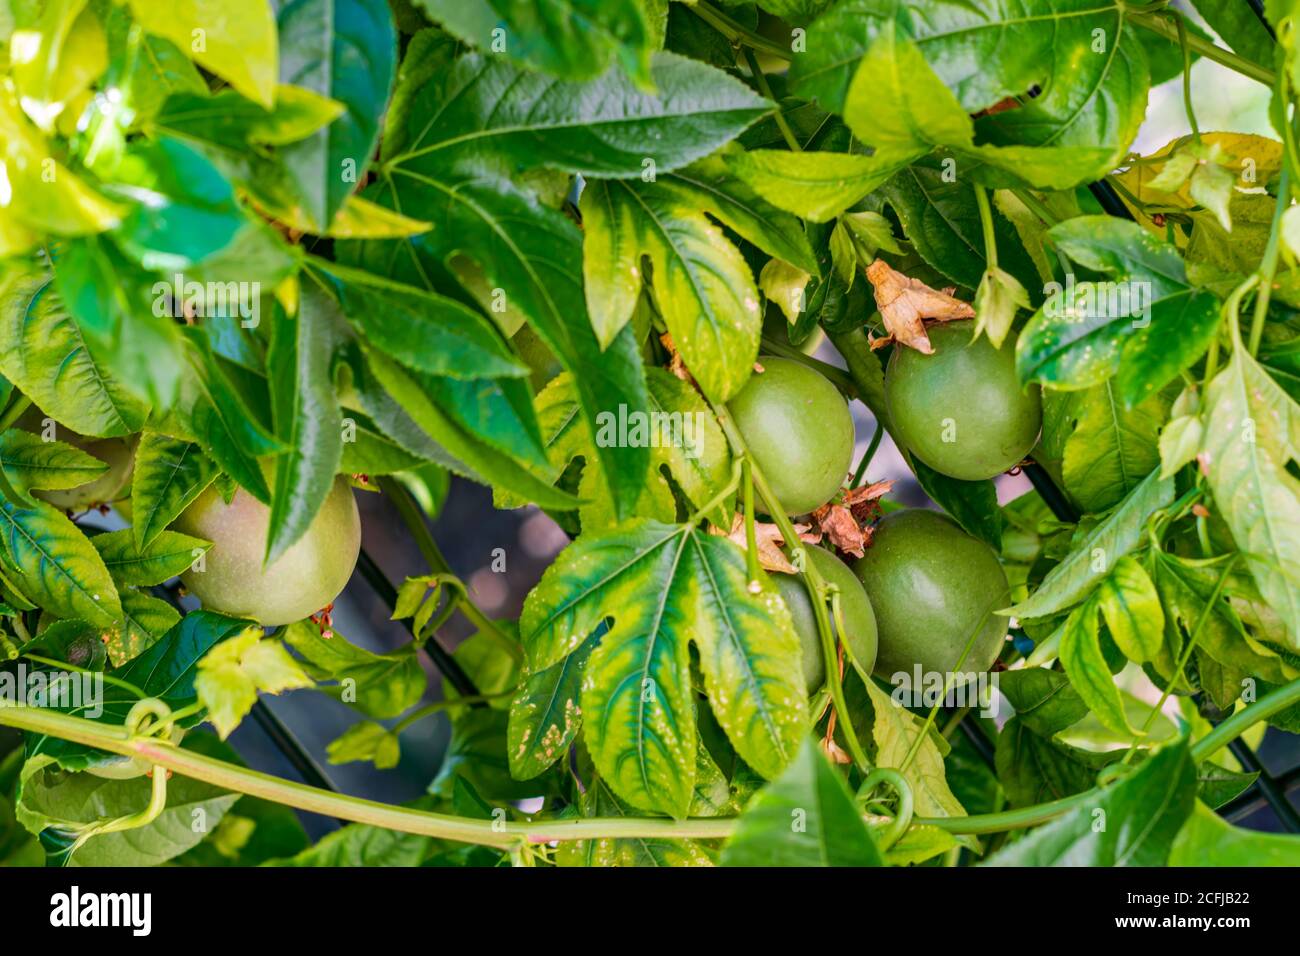 Passion fruit in plant Stock Photo